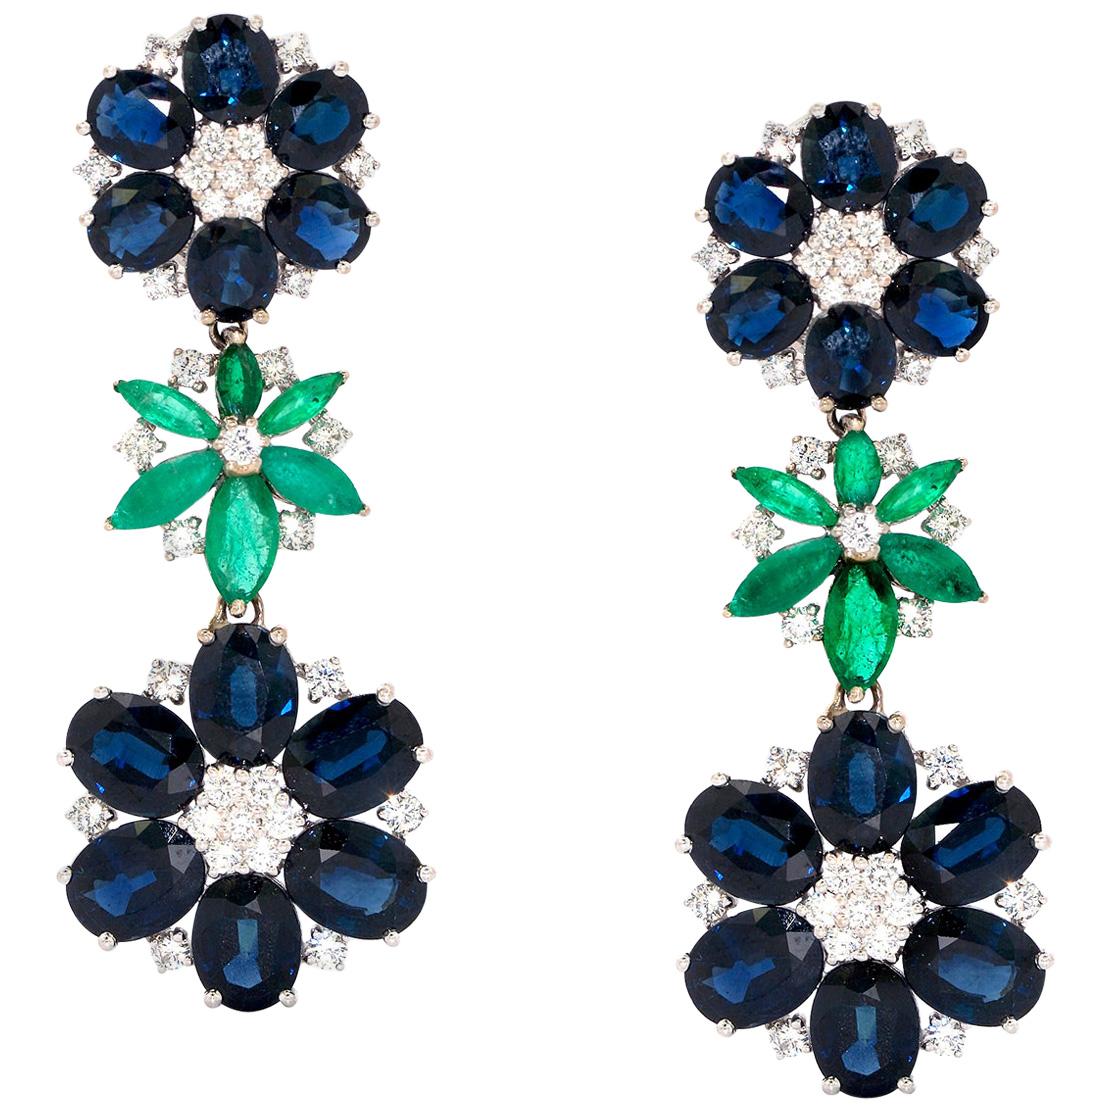 Classic Floral Drop Earrings, Set with 33.16 Ct Sapphires, Emeralds and Diamonds